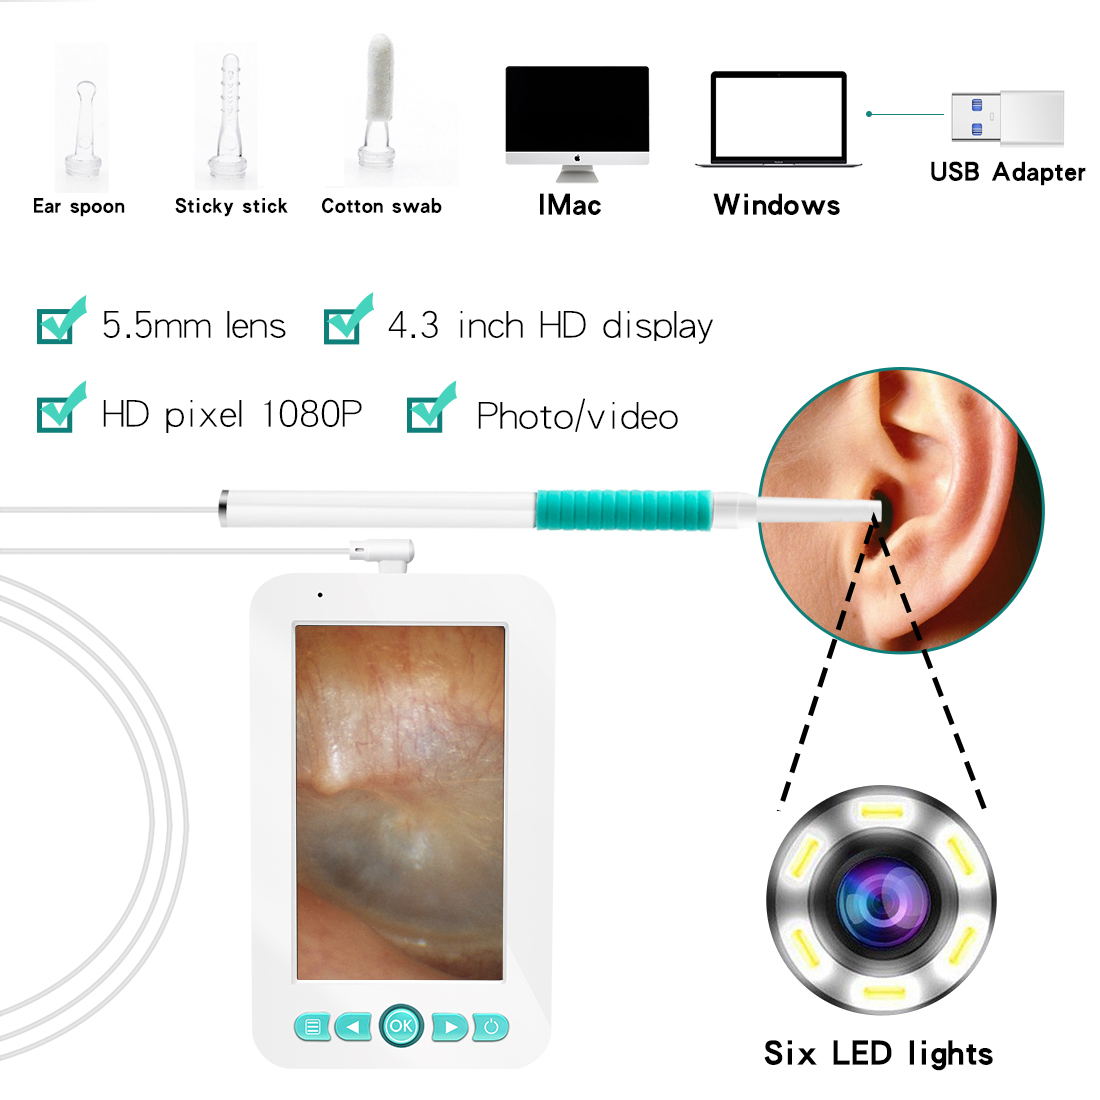 1080P-43-inch-HD-display-55mm-Ear-Endoscope-Video-Pen-Camera-with-Type-c-Cable-1350106